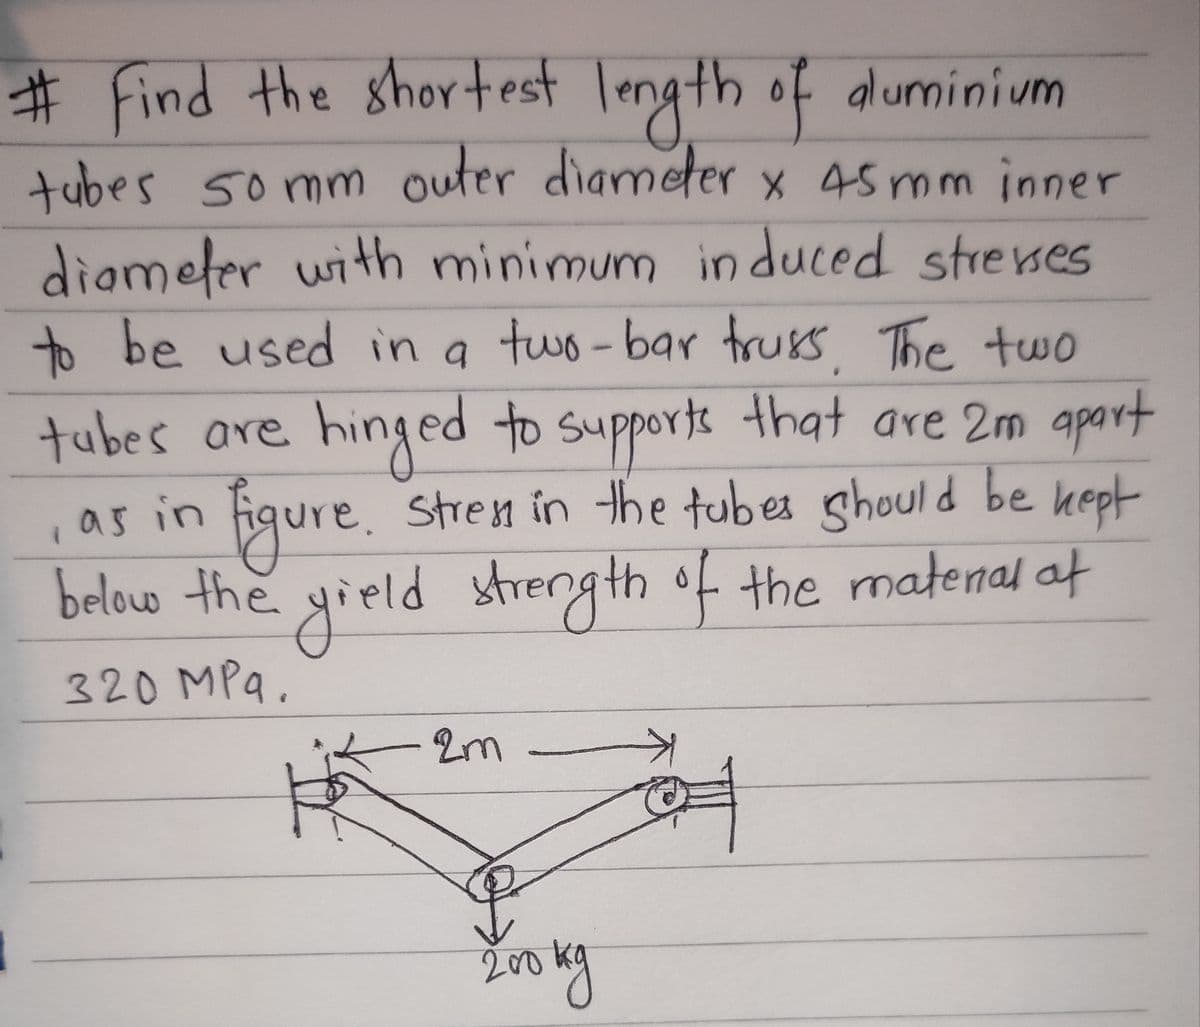 # Find the shortest length of aluminium
tubes 50mm outer diameter x 45 mm inner
diameter with minimum induced stresses
to be used in a two-bar truss, The two
tubes are hinged to supports that are 2m apart
figure. Stress in the tubes should be kept
below the yield strength of the matenal at
320 MPq.
A
, as in
1
of
2m
200 kg